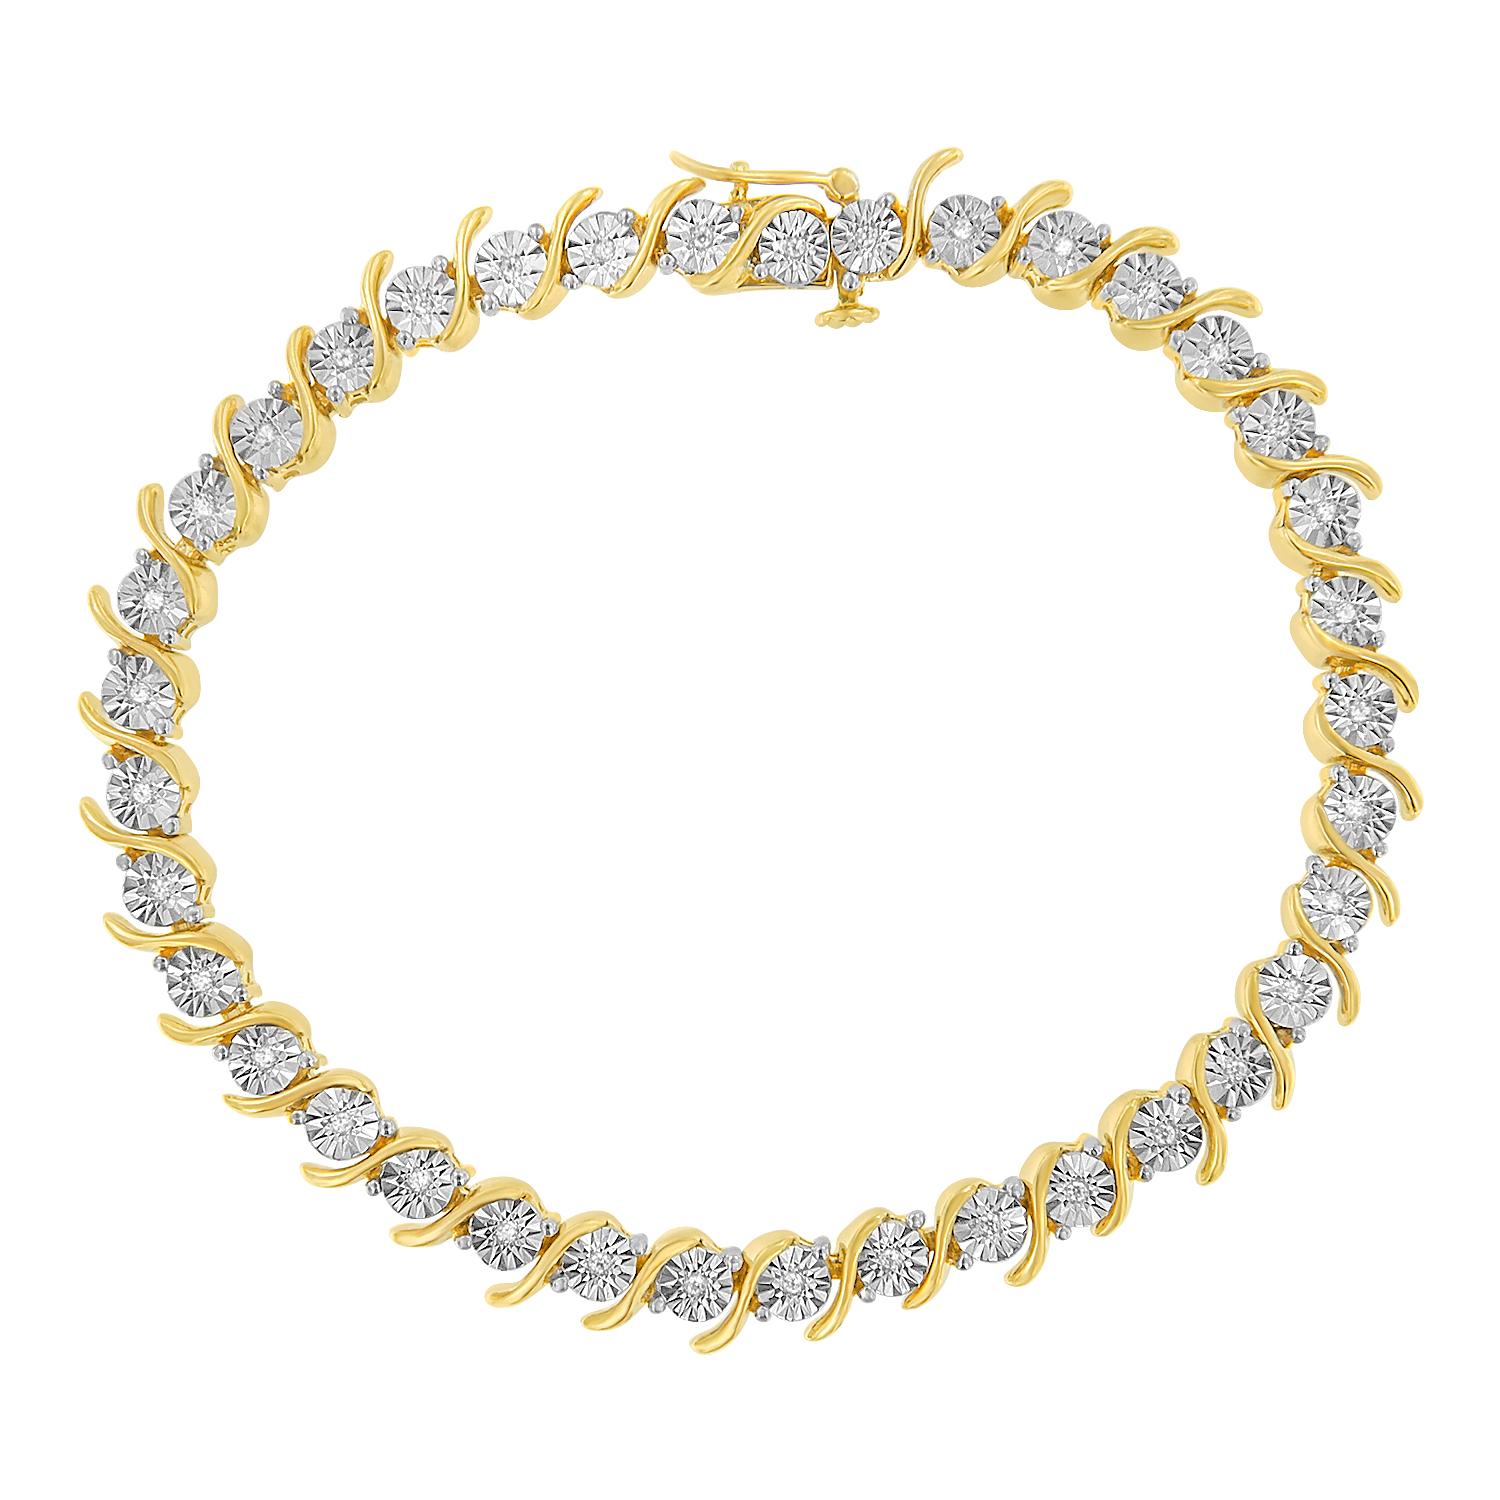 Elegant and timeless, this gorgeous 92.5% sterling silver tennis bracelet features 0.1 carat total weight of natural round brilliant cut white diamonds with 18 individual stones in all. The tennis bracelet has each diamond set into a faceted bezel